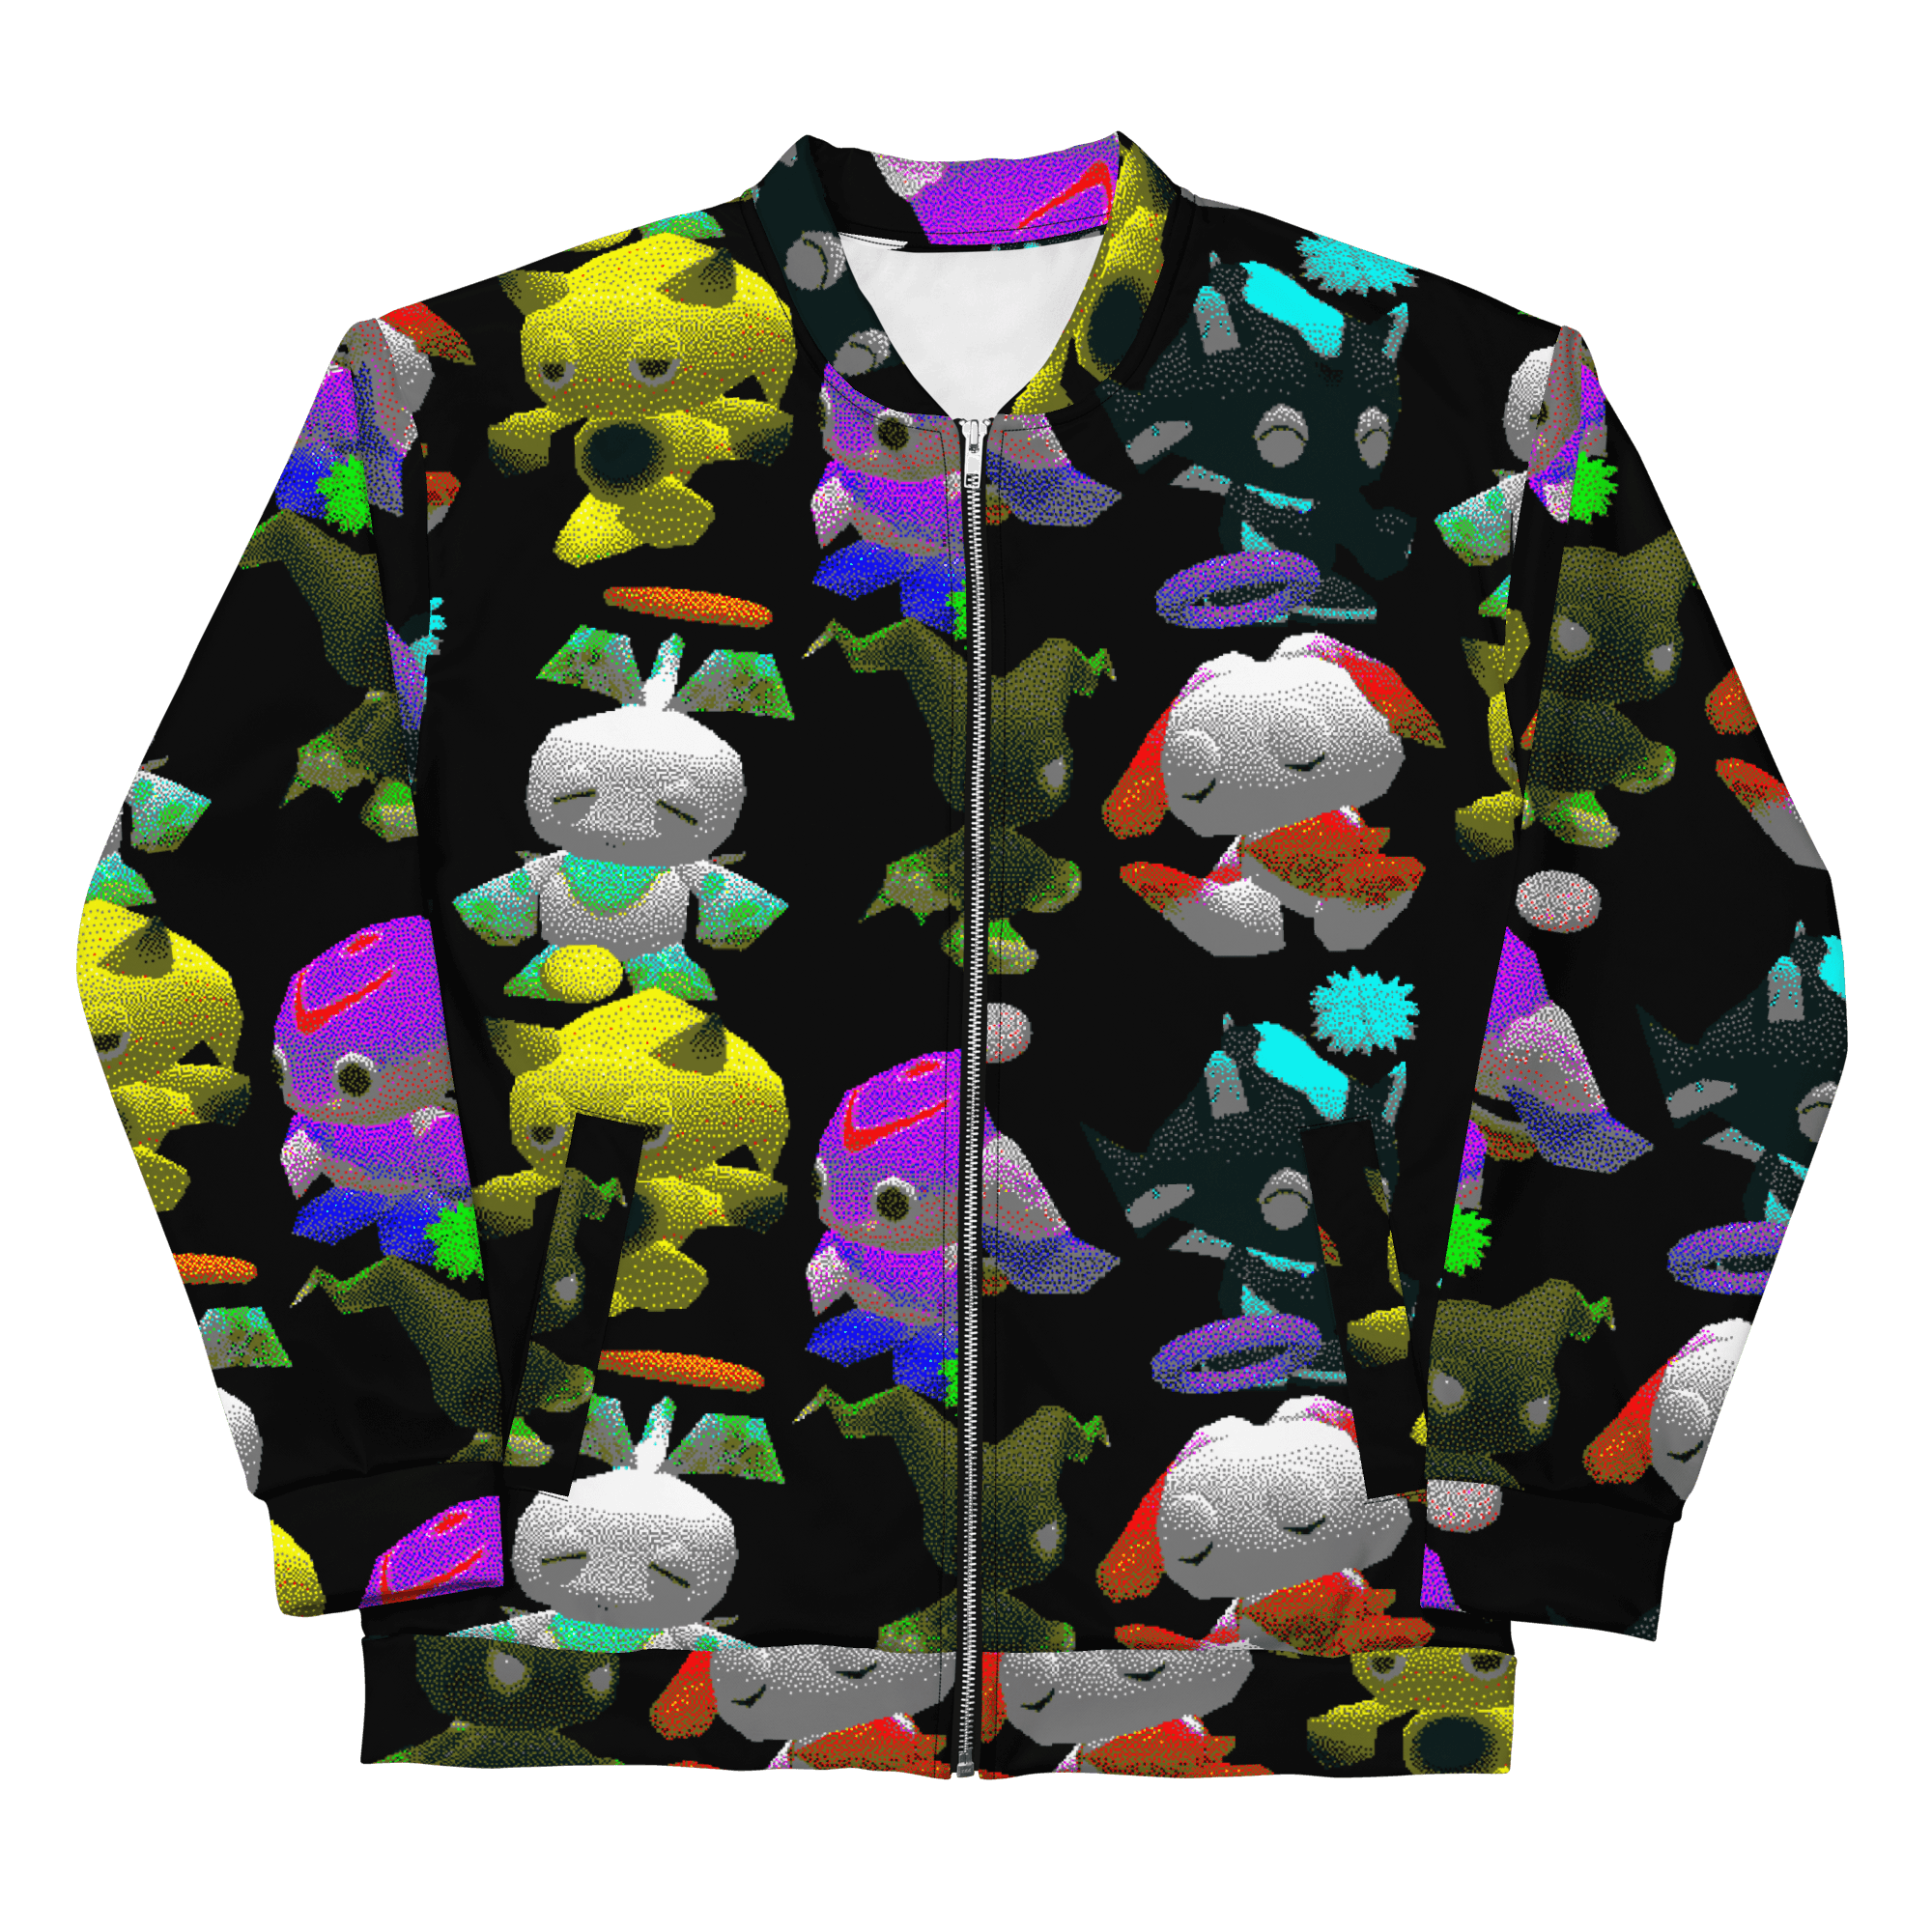 C Gang® Bomber Jacket (7 pieces for sale) - Kikillo Club